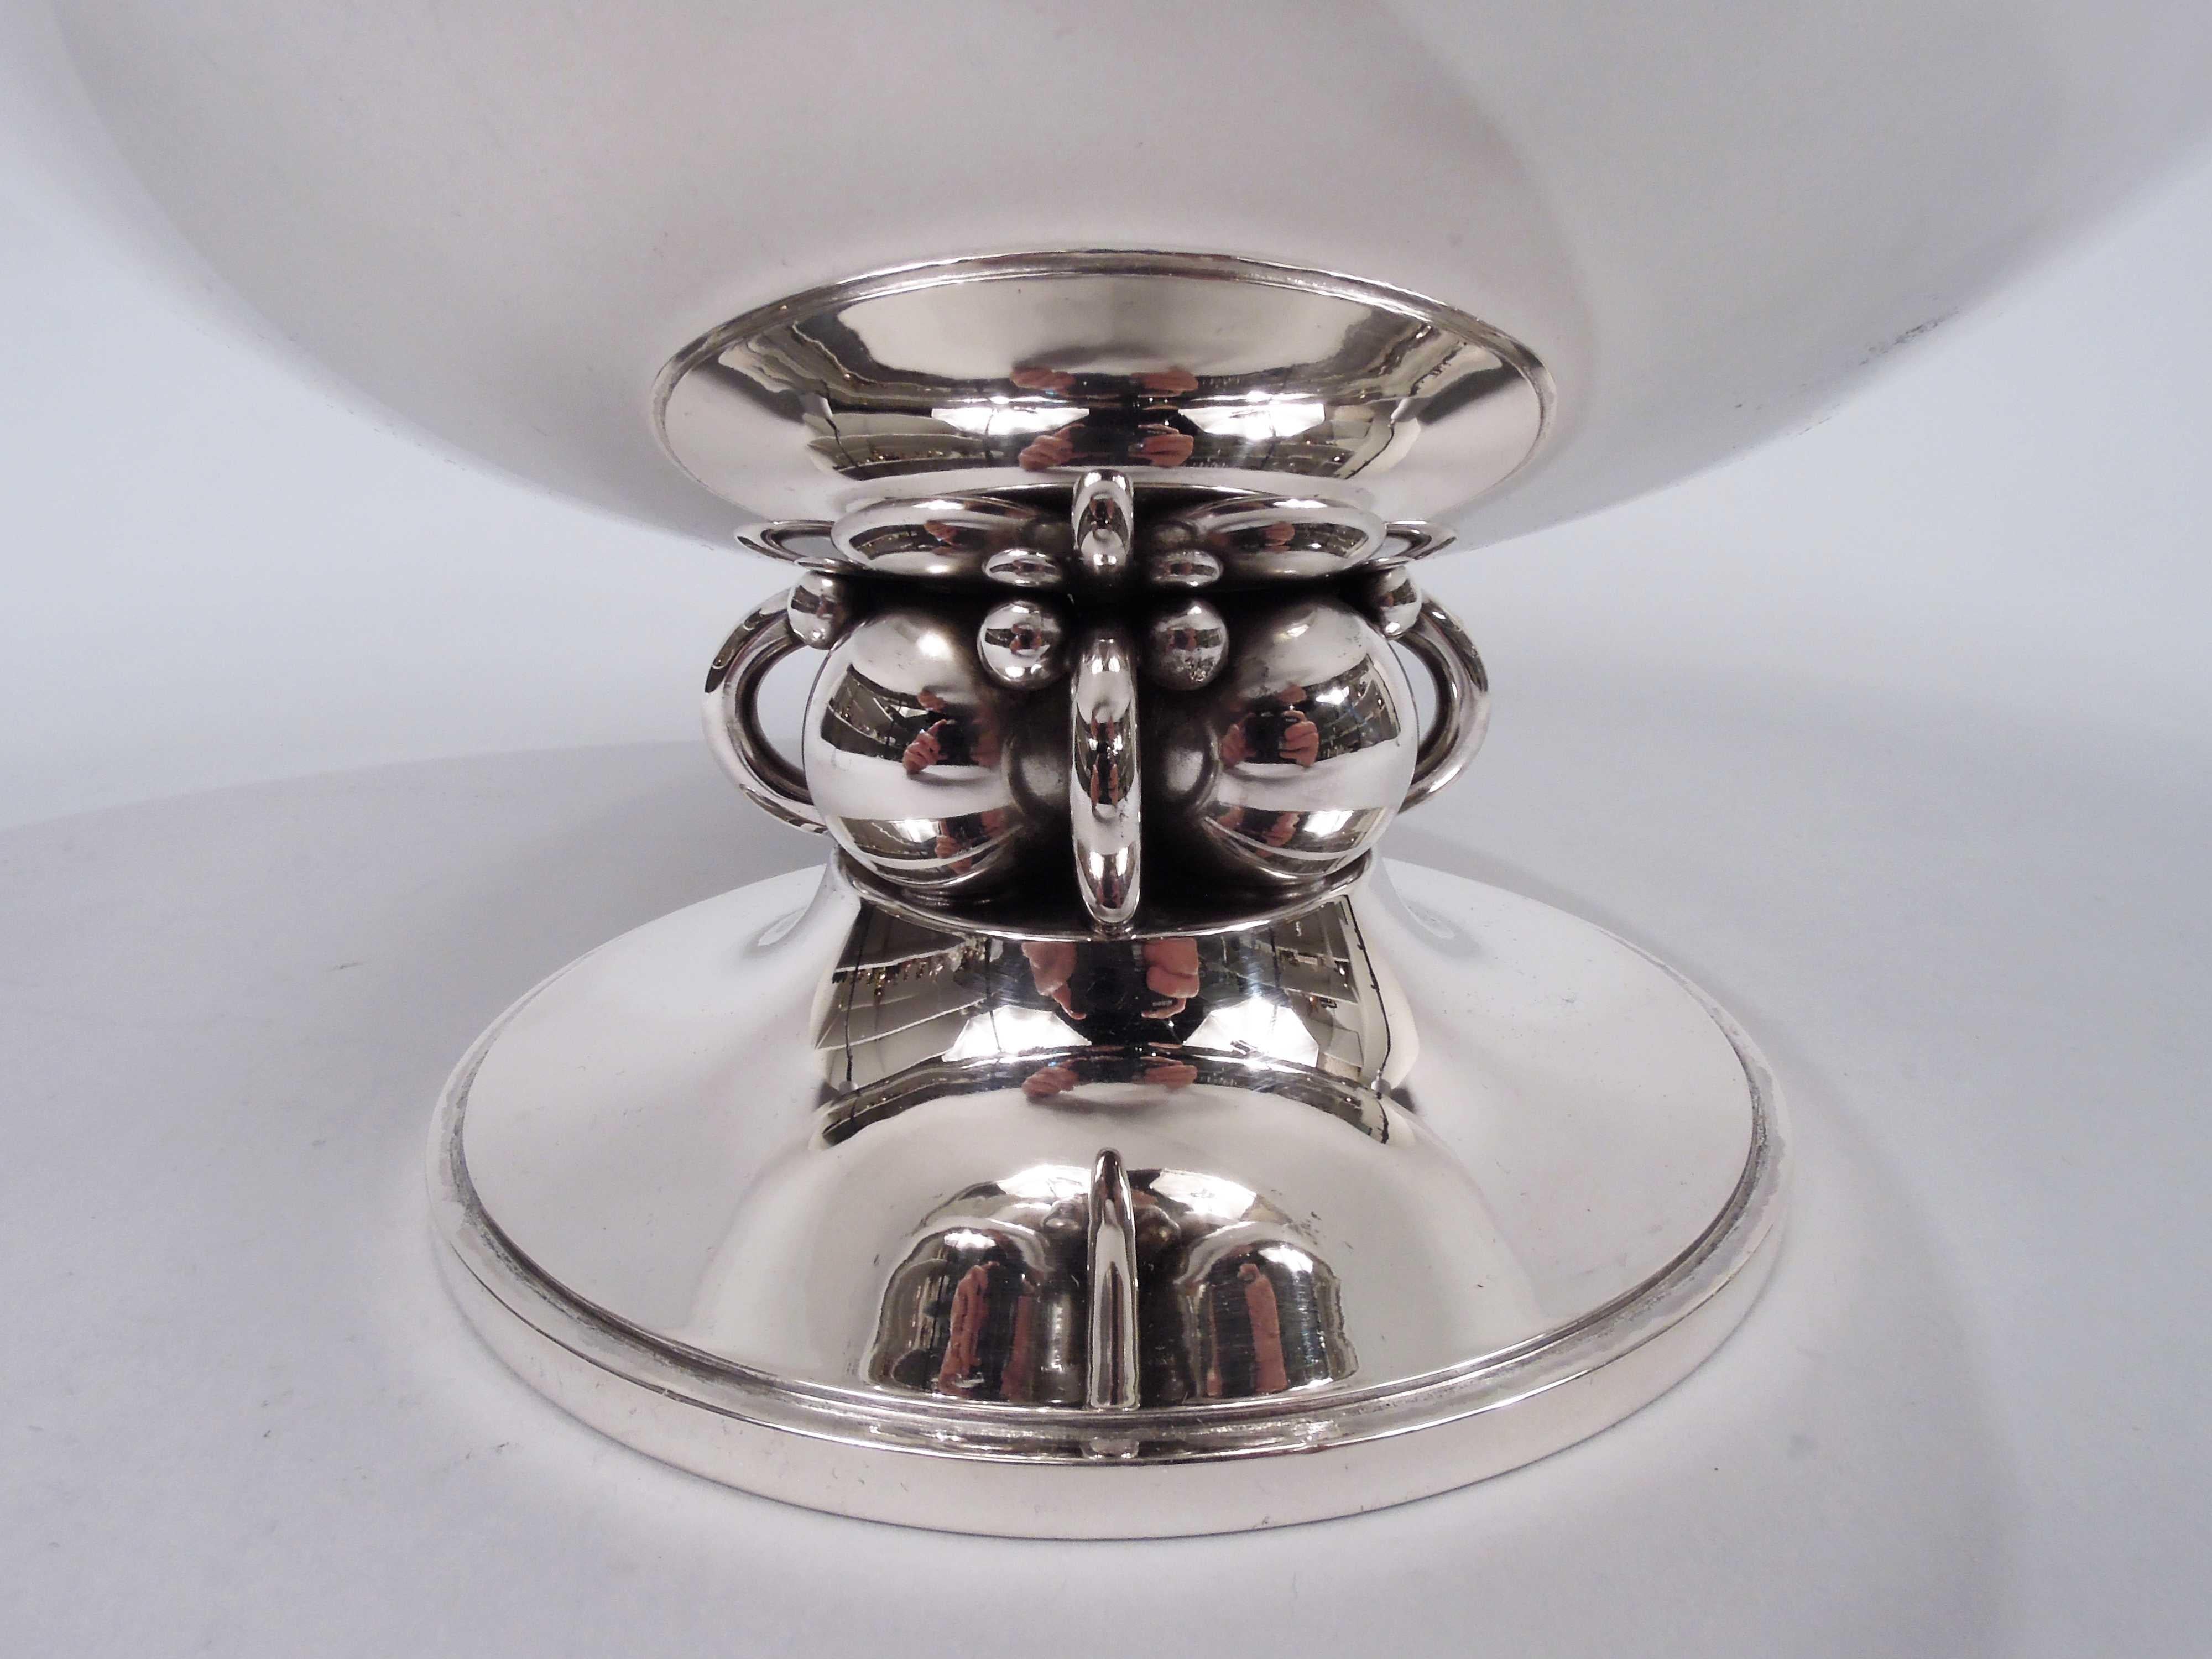 La Paglia Midcentury Modern Sterling Silver Centerpiece Bowl In Good Condition For Sale In New York, NY